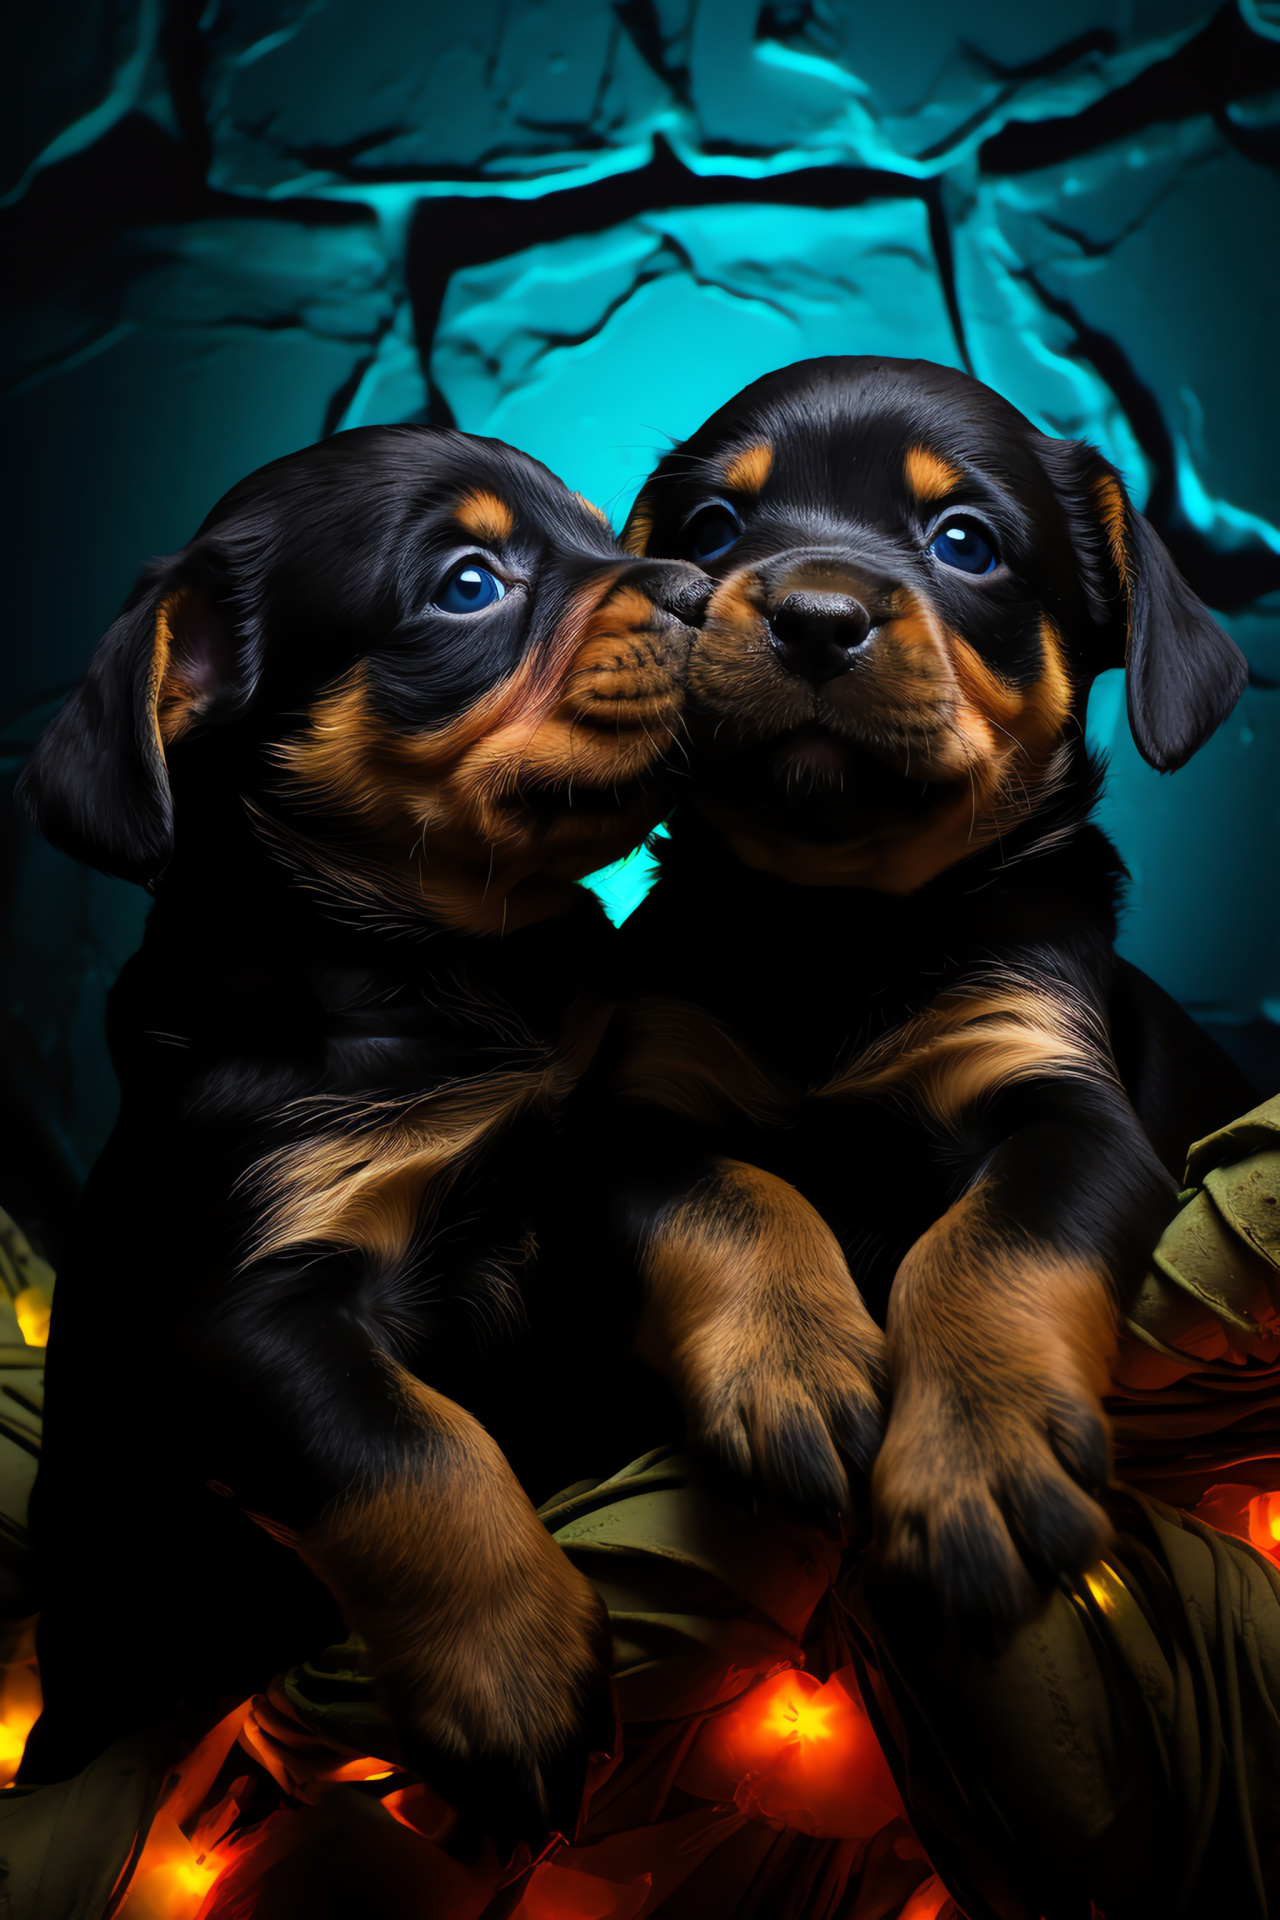 Playful puppies, Rottweiler litter, Canine friends, Shiny coats, Neon ambiance, HD Phone Image